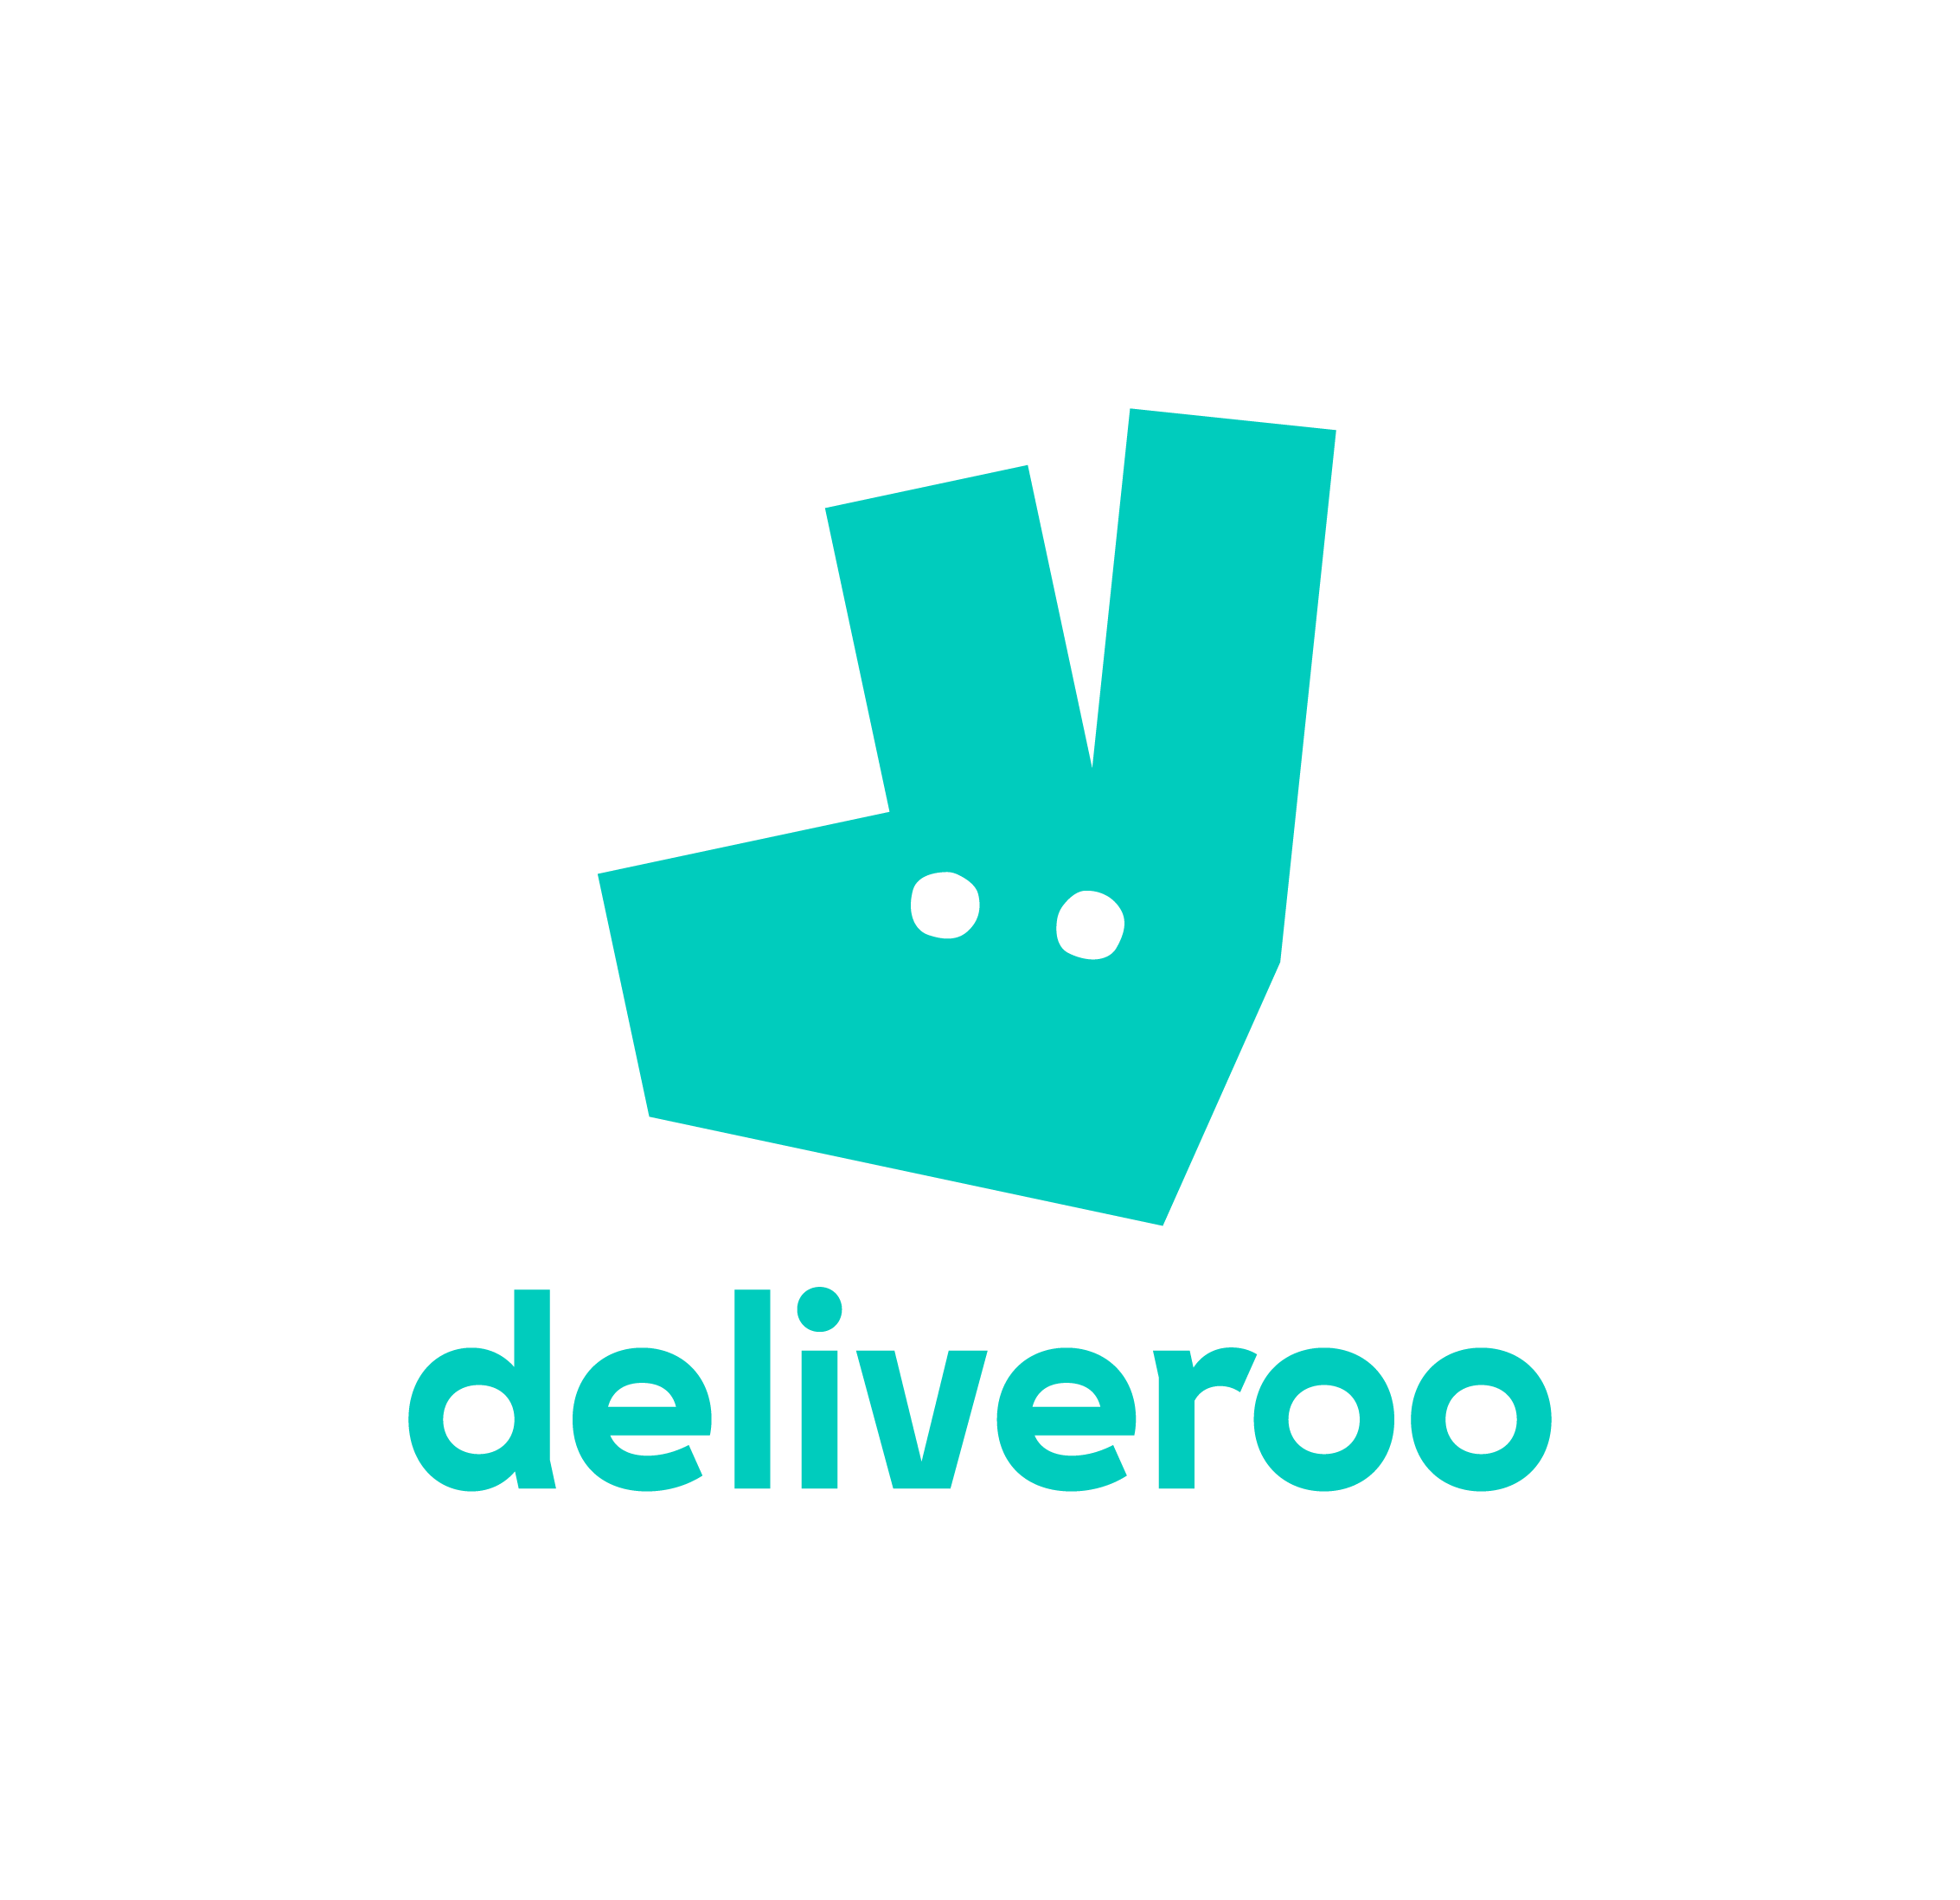 The Gate - Deliveroo